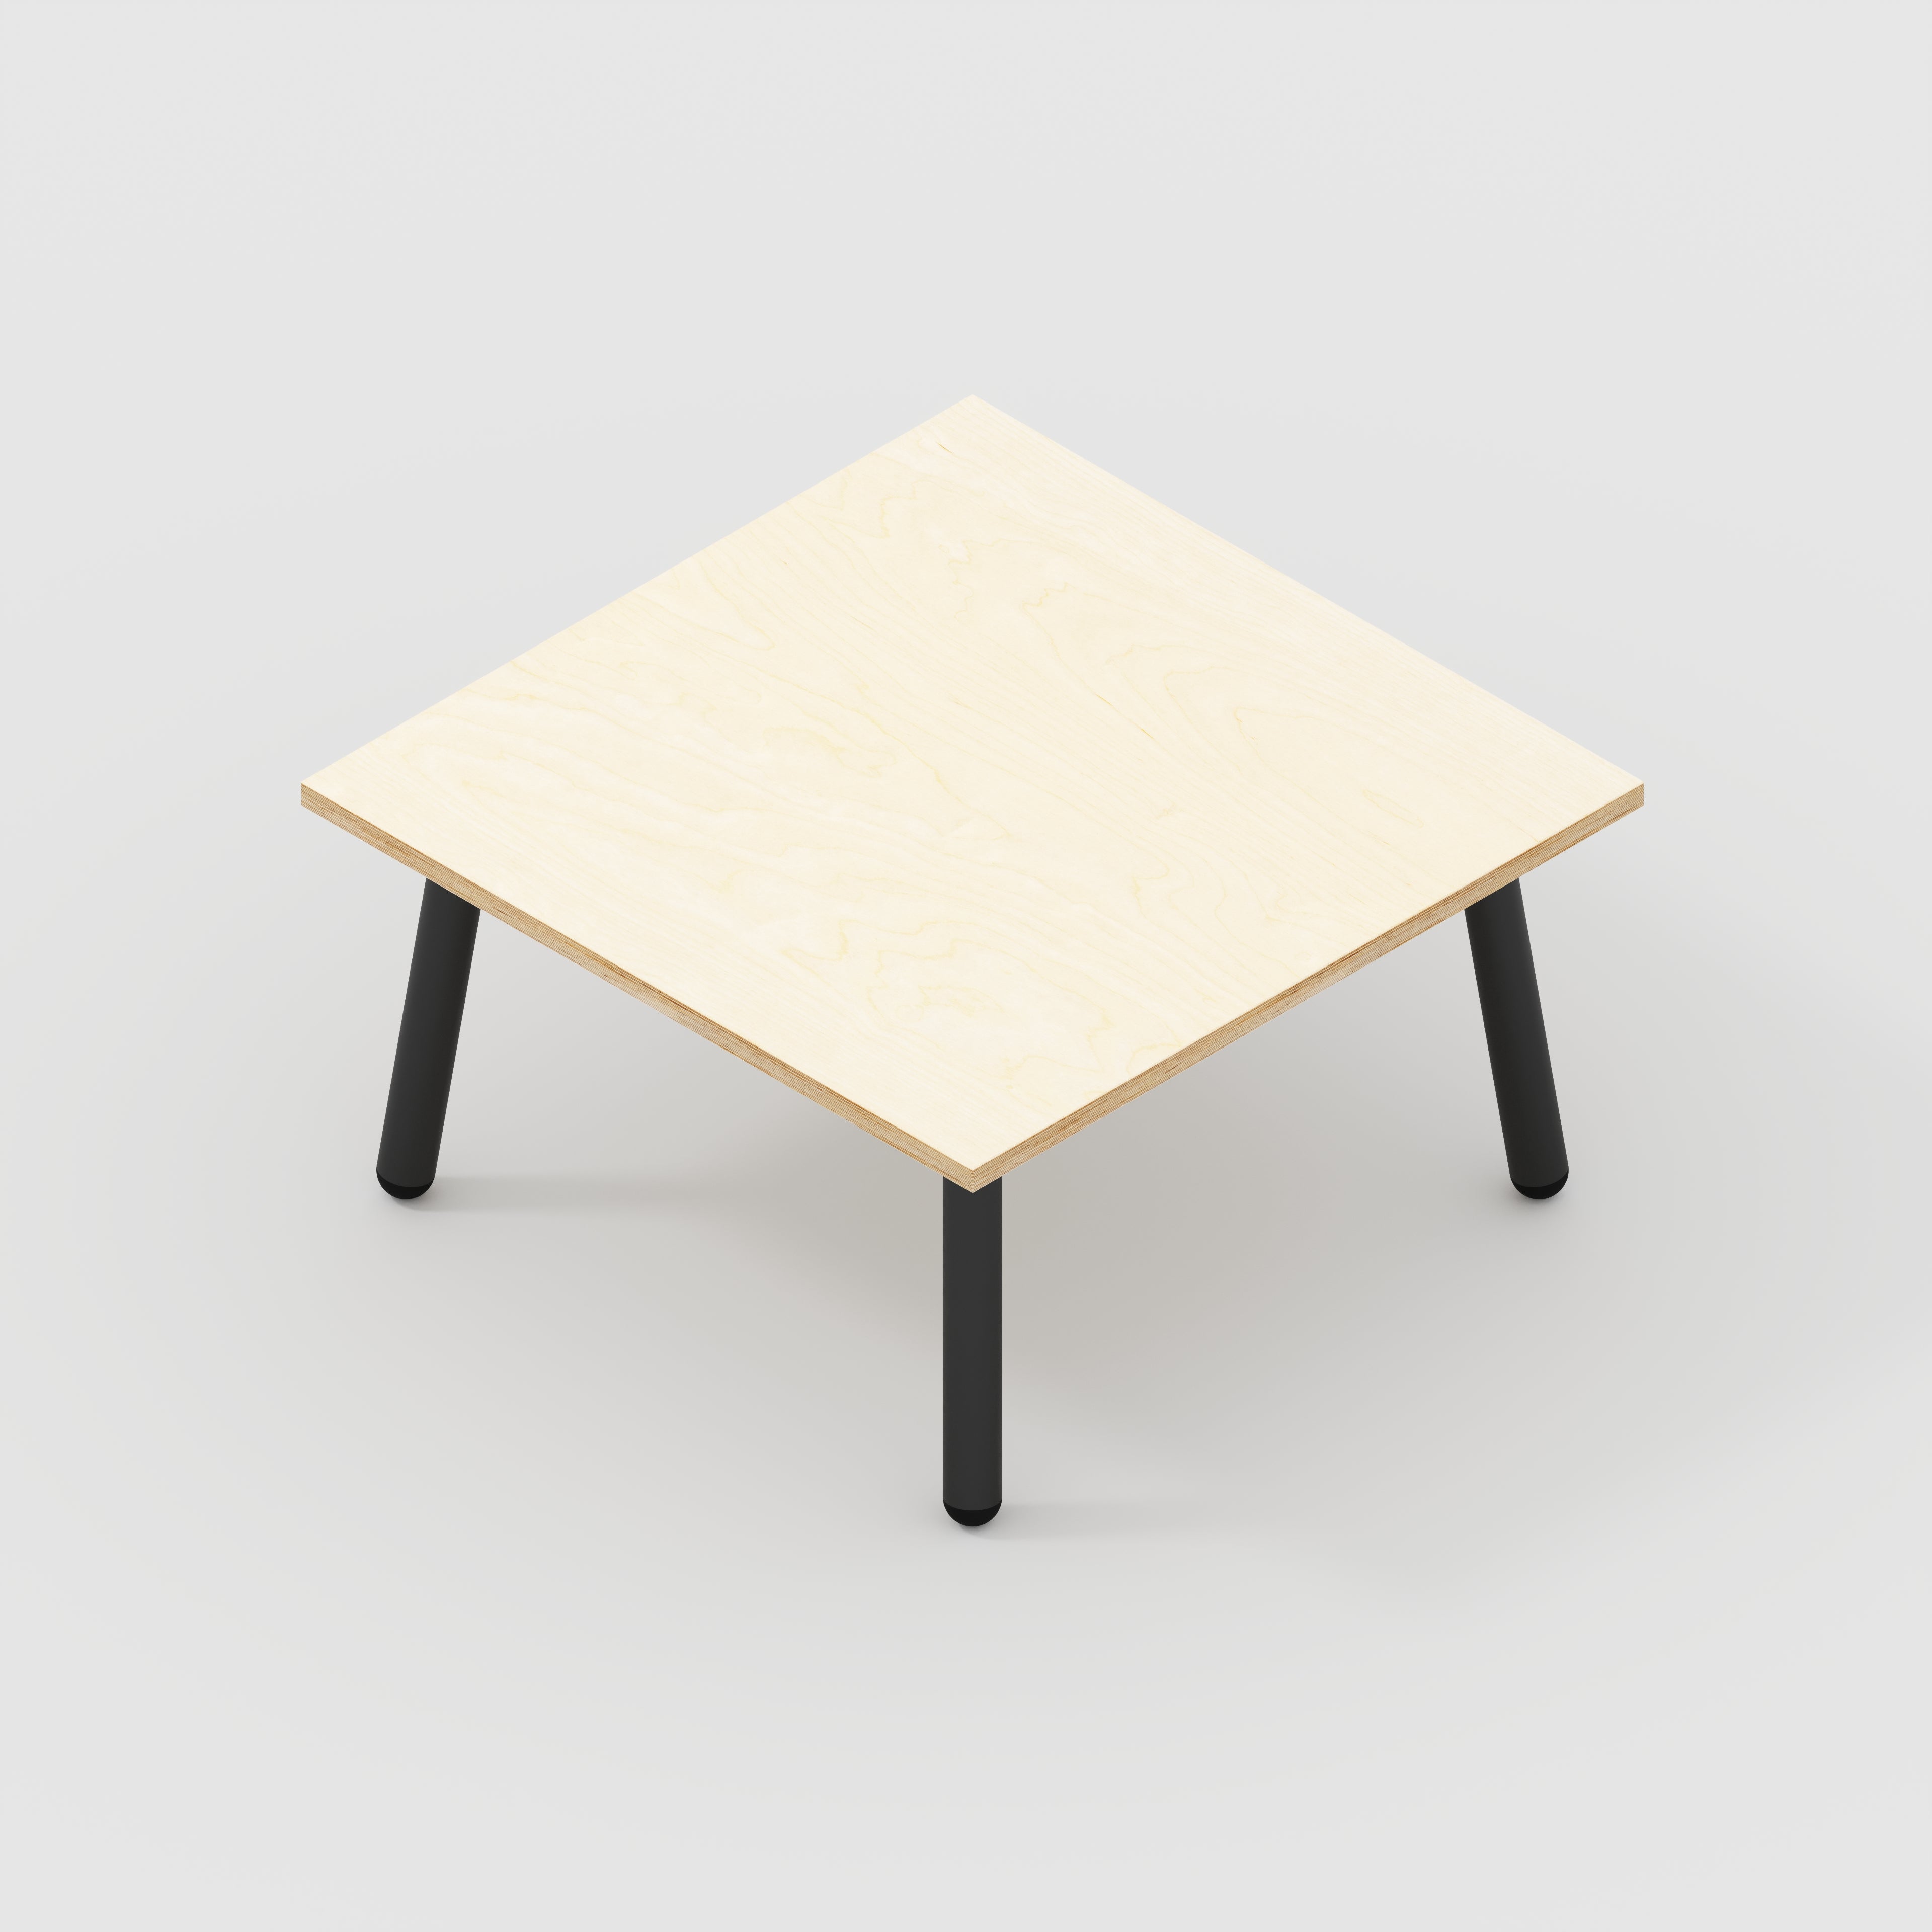 Coffee Table with Black Round Single Pin Legs - Plywood Birch - 800(w) x 800(d) x 425(h)